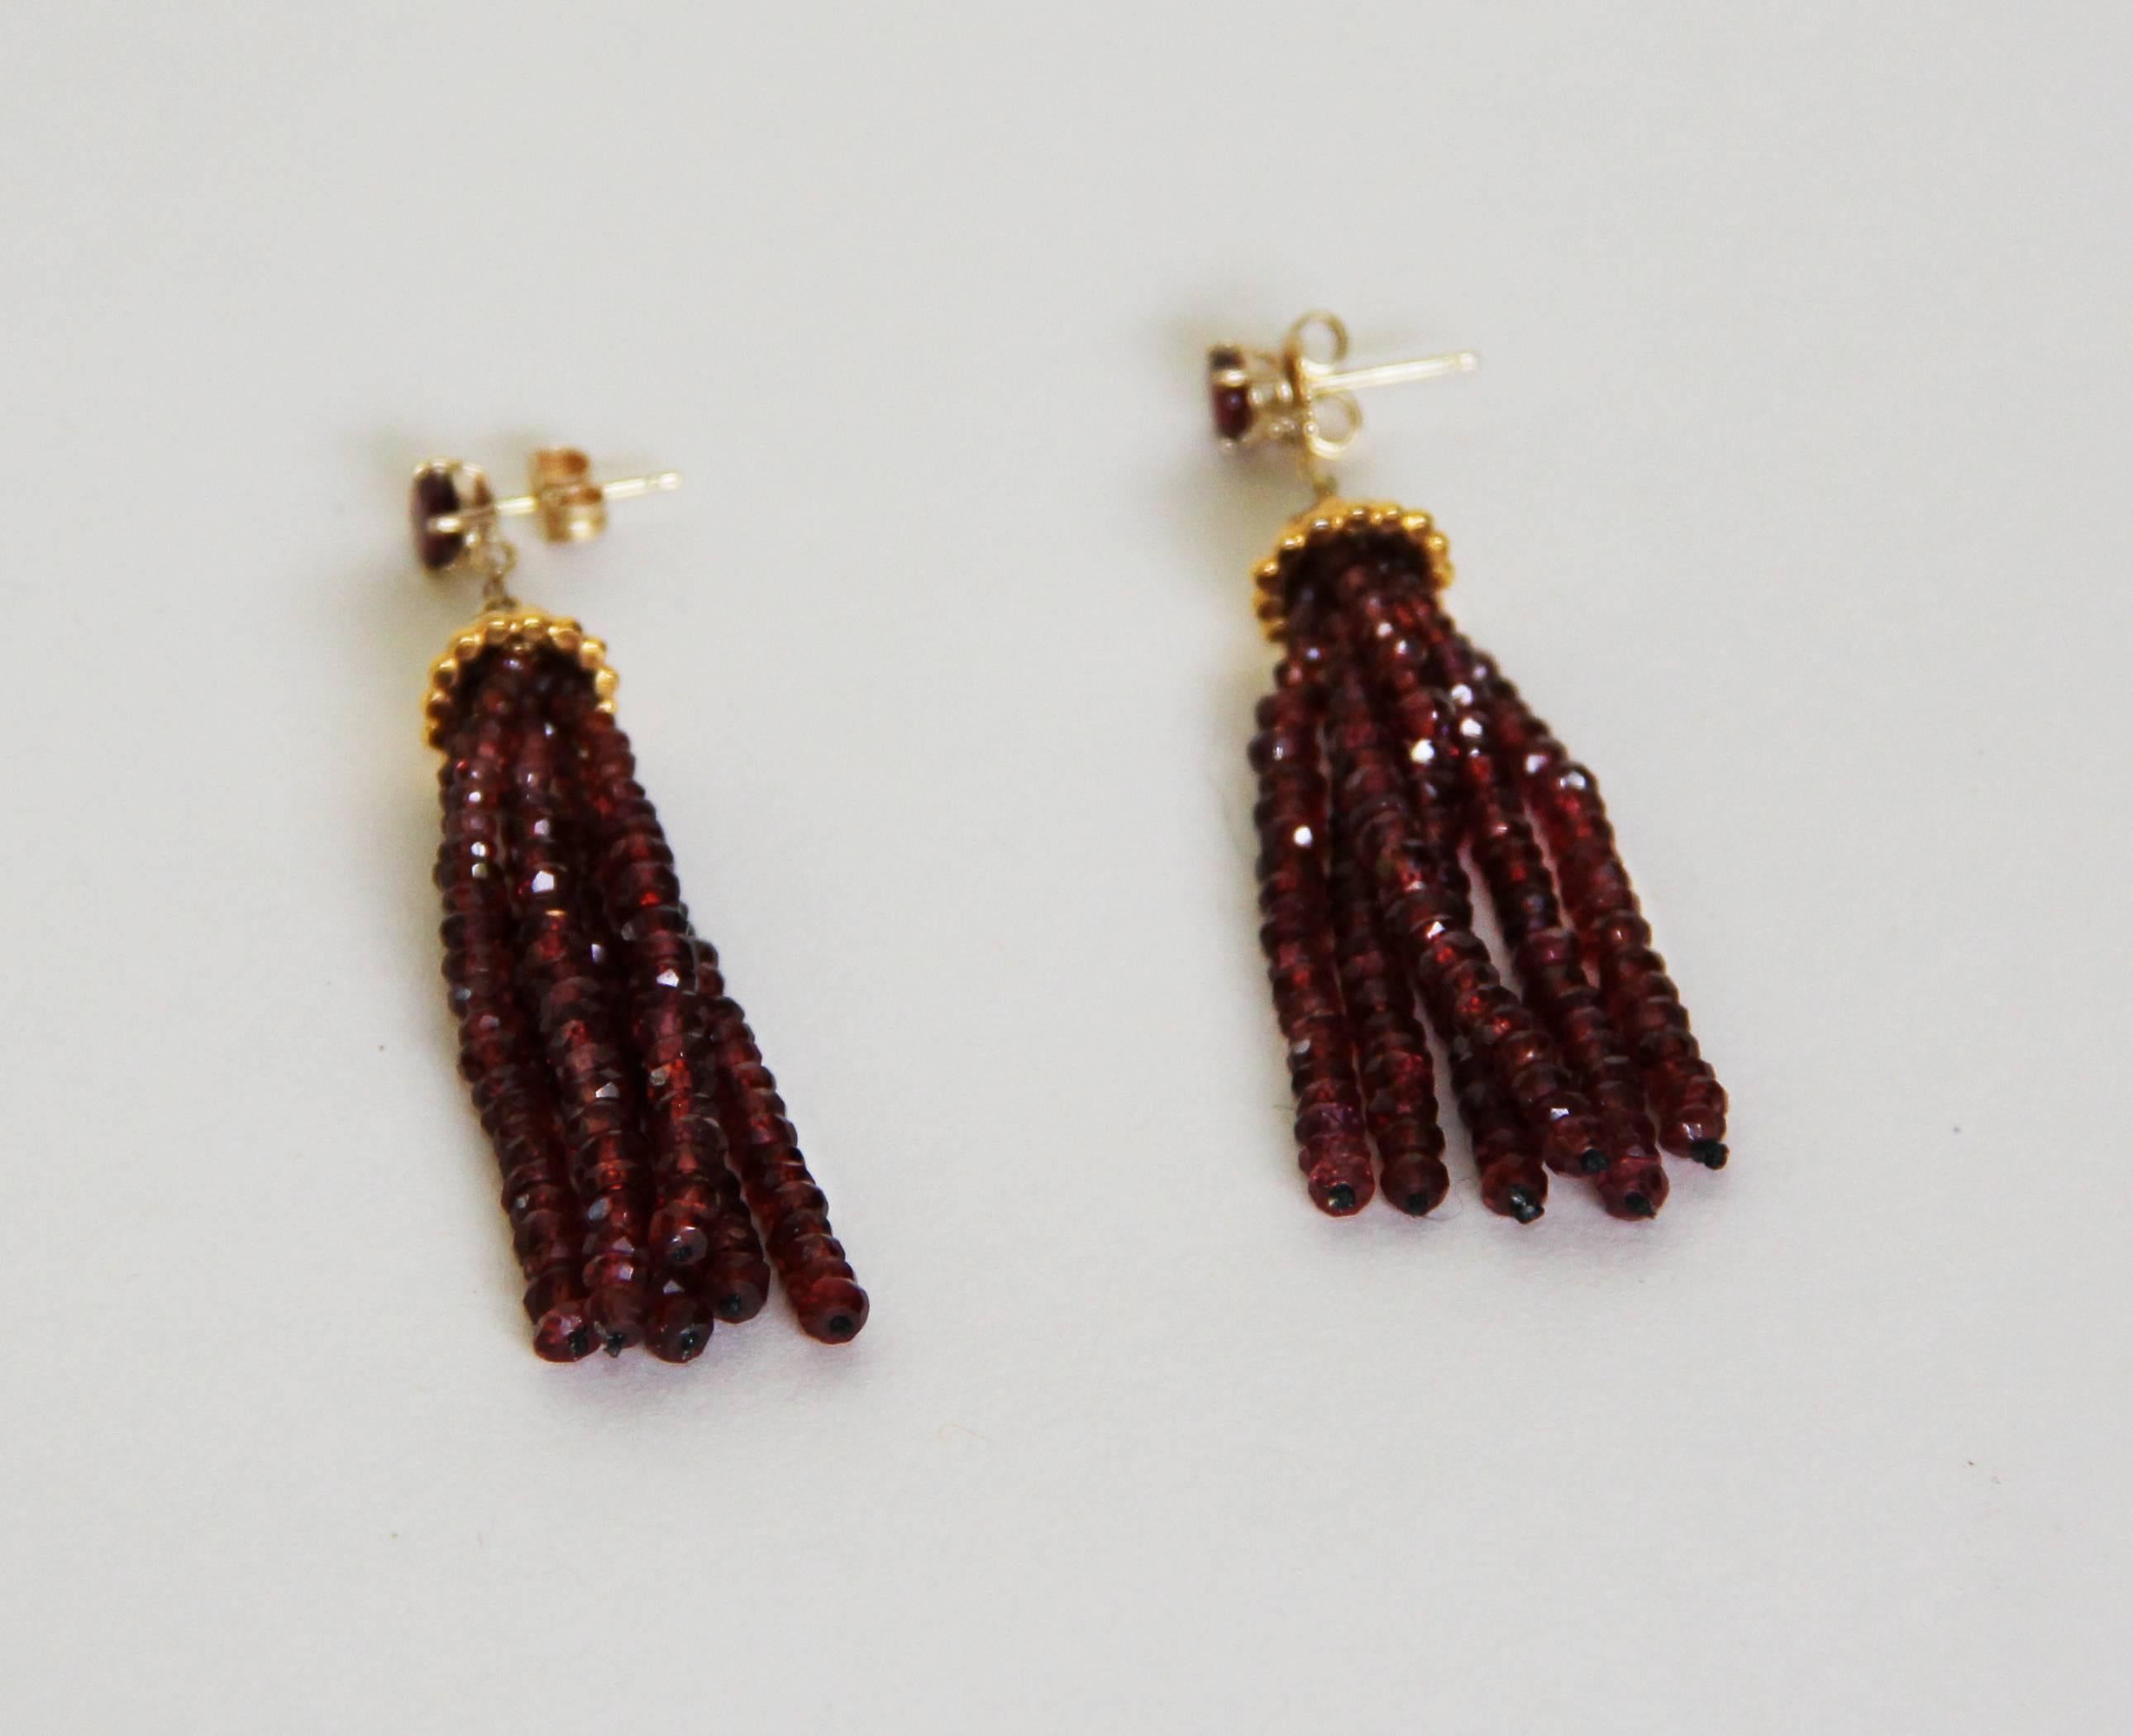 Artist Garnet Tassel Earrings with Gold-Plated Silver Cup and Gold Stud by Marina J